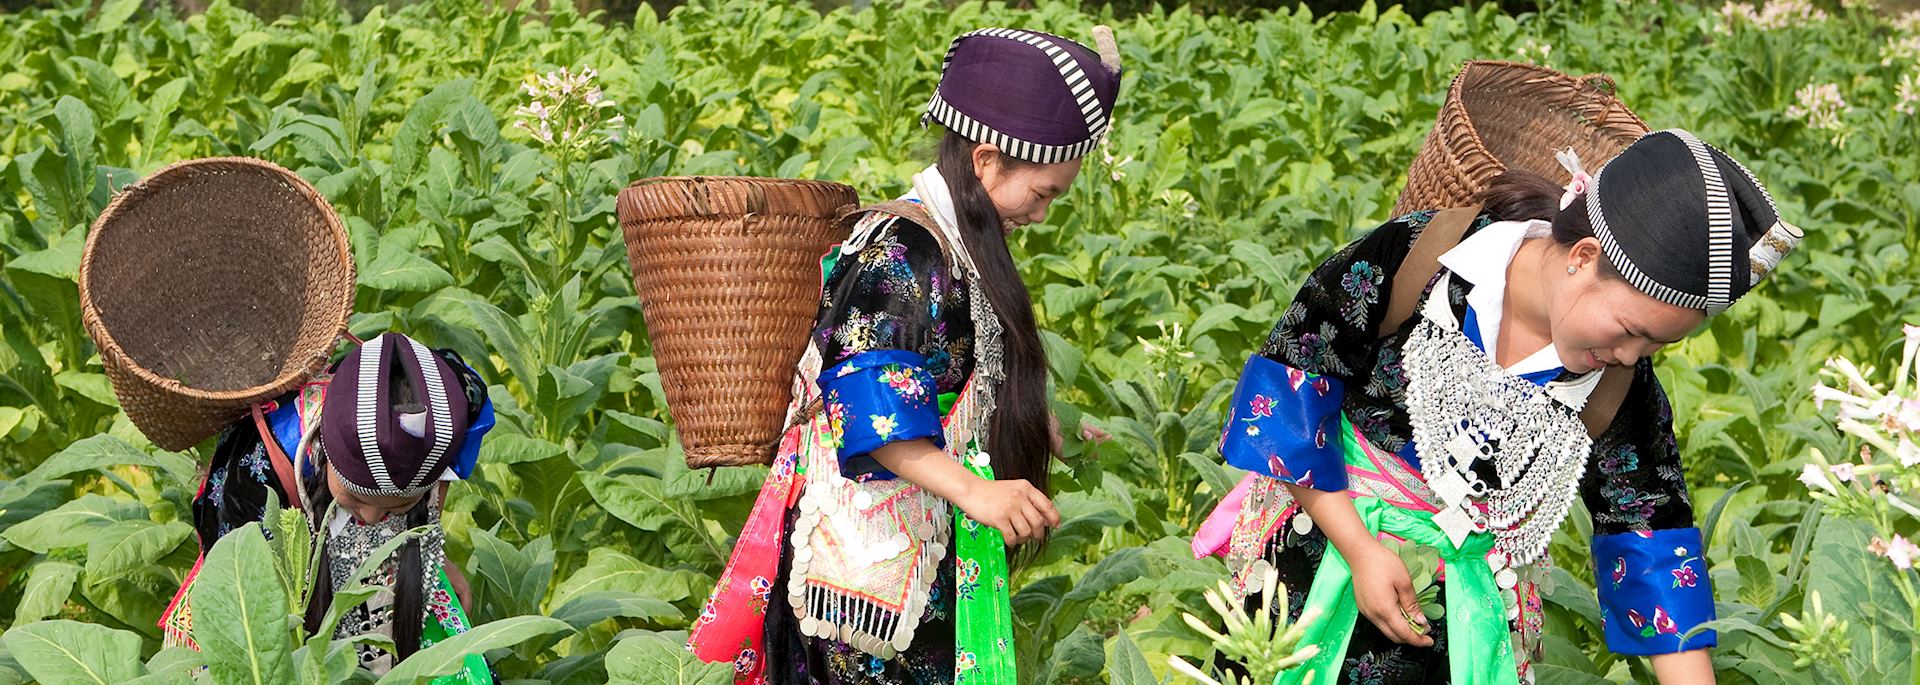 Hmong people harvesting tobacco